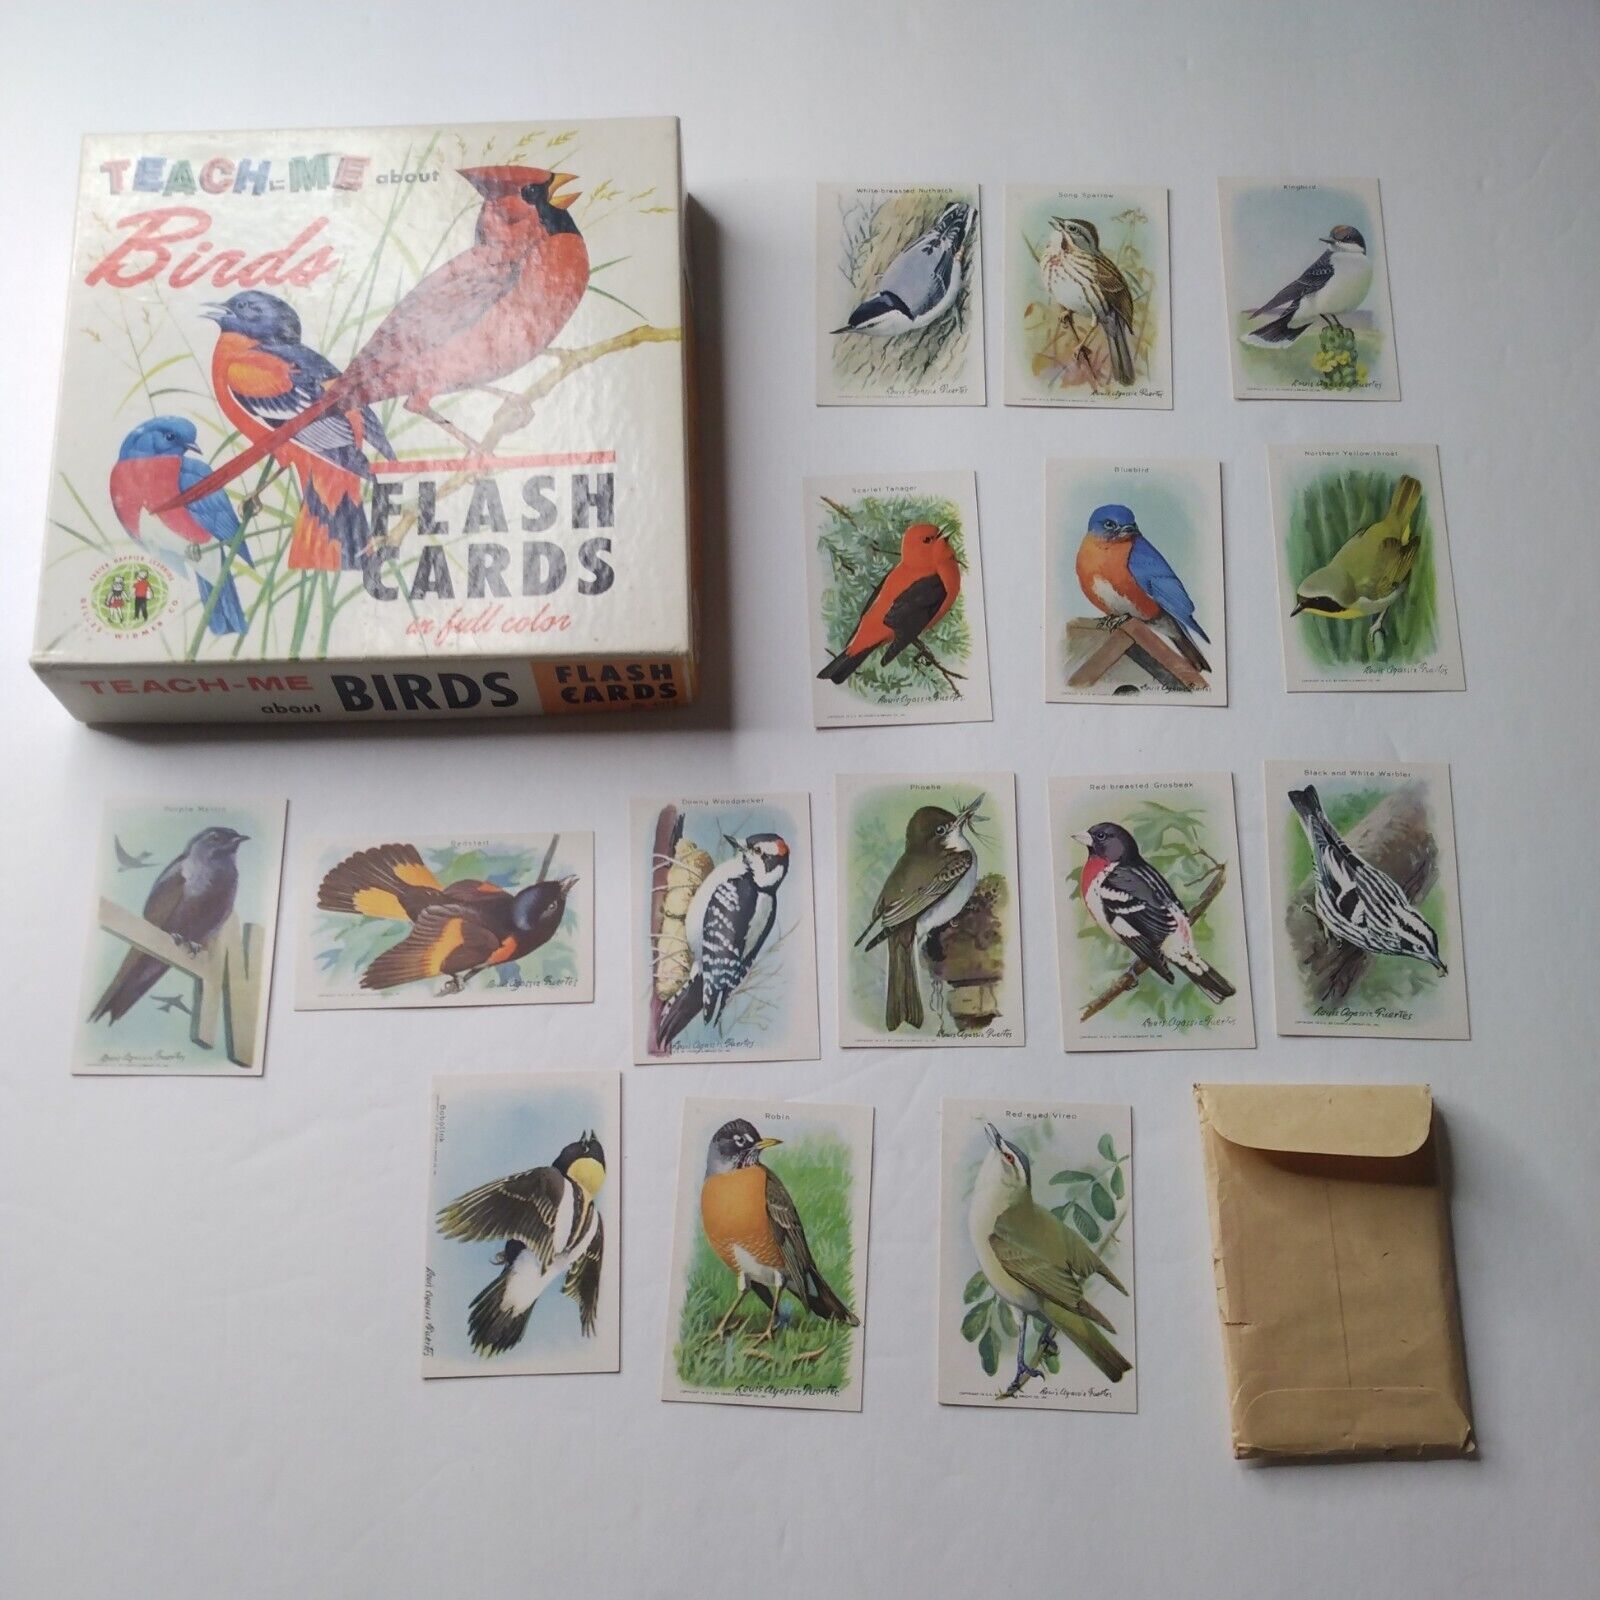 Teach-Me-about Birds Flash Cards + 15 9th Series Useful Birds of America 